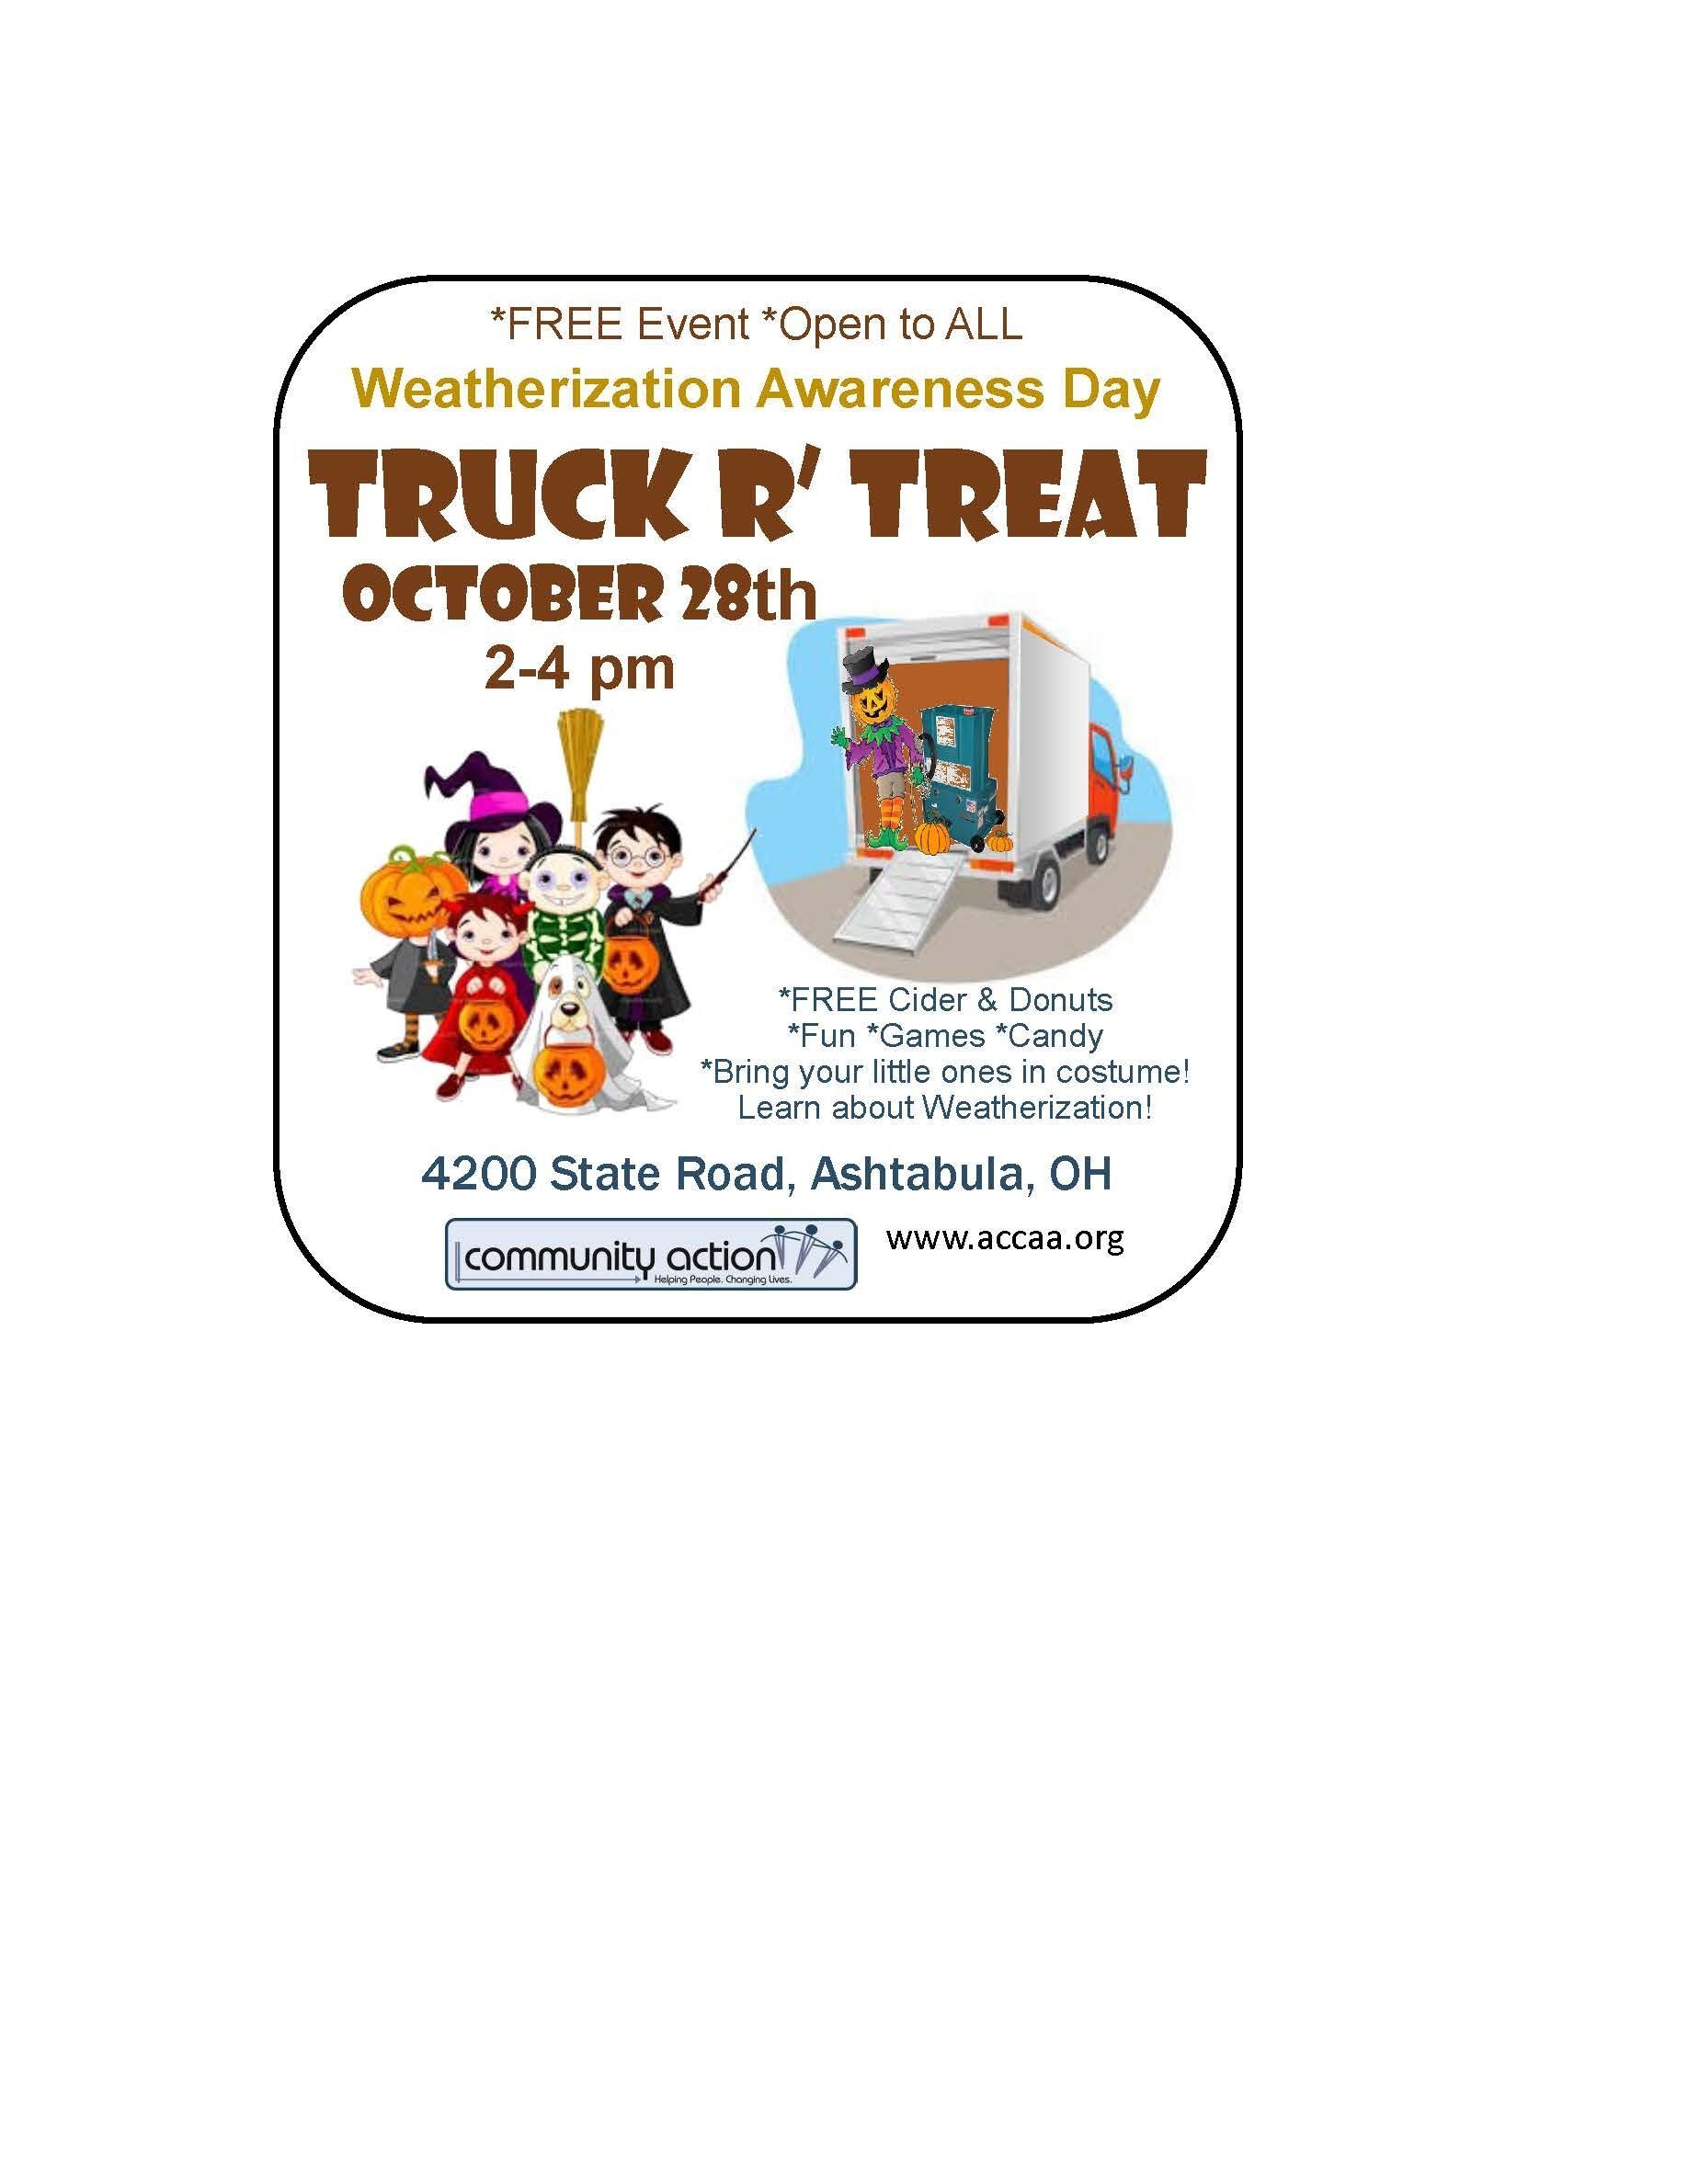 Weatherization Day Truck R Treat Event!